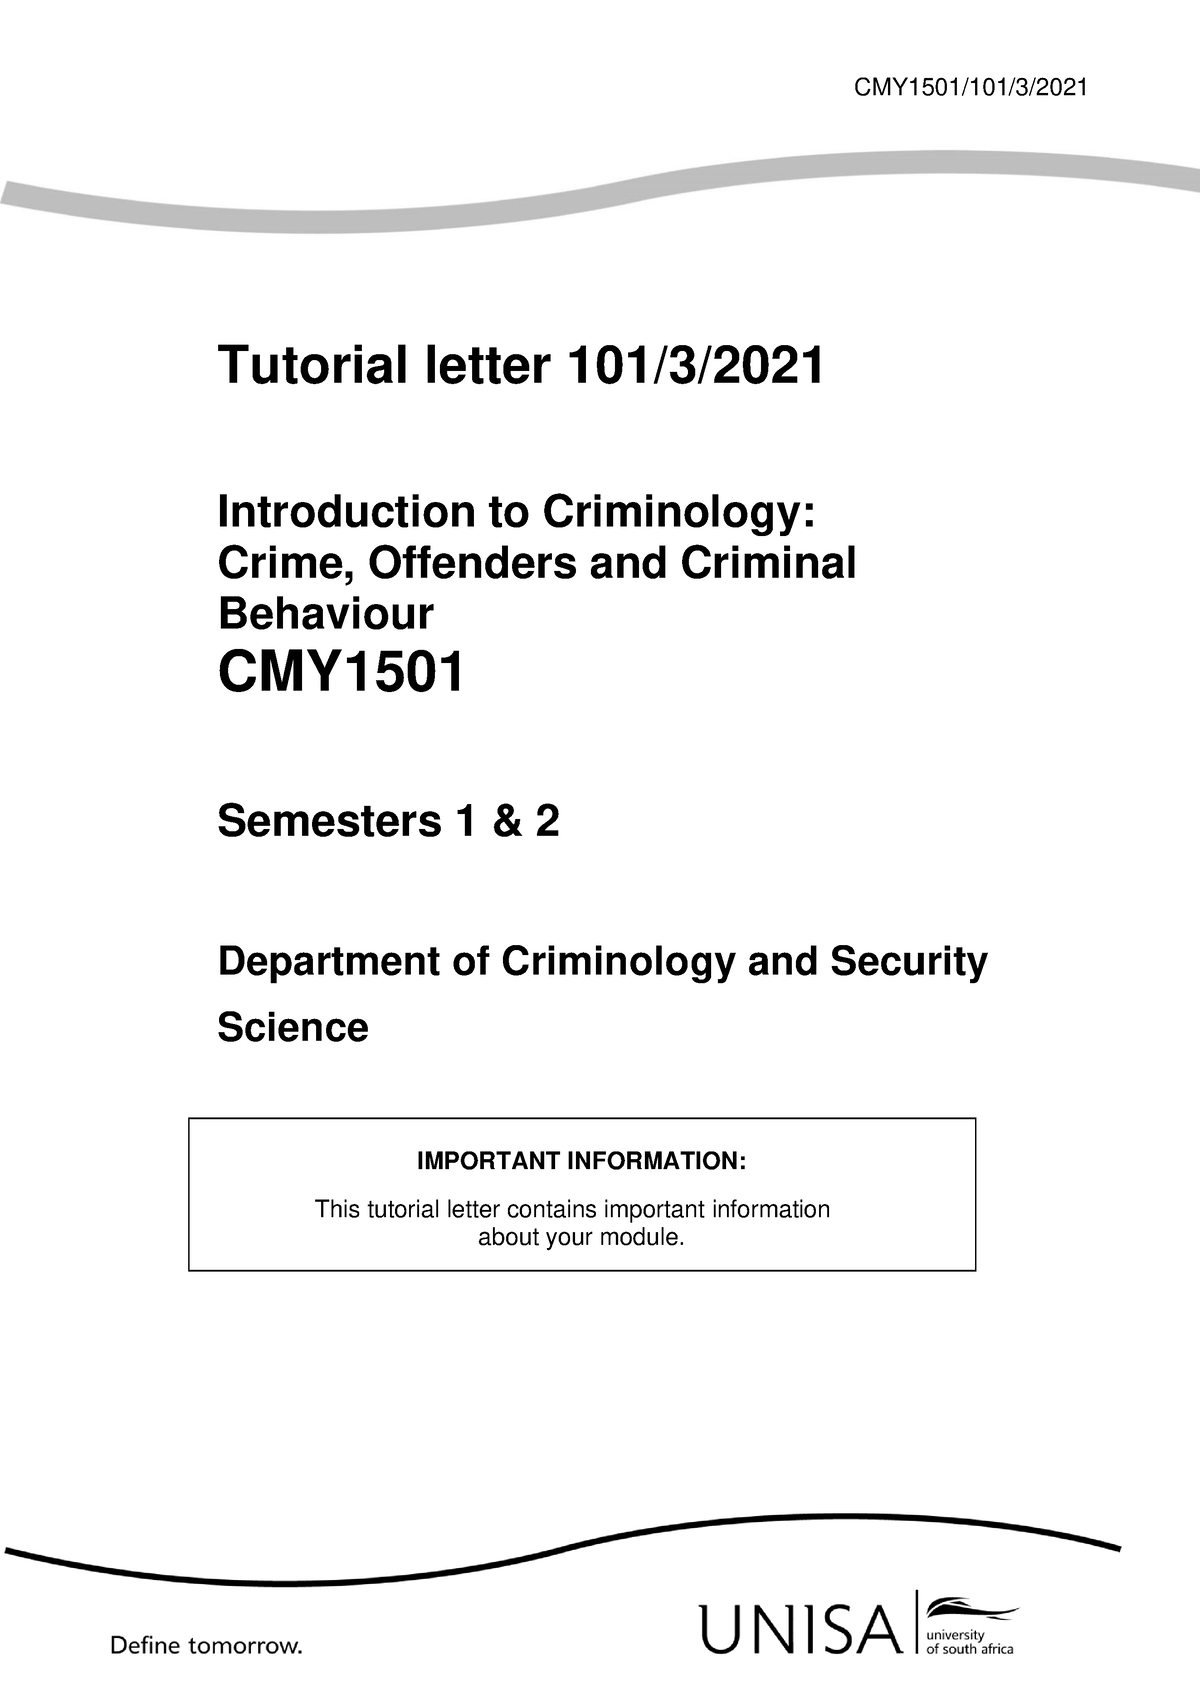 cmy1501 assignment 1 answers 2021